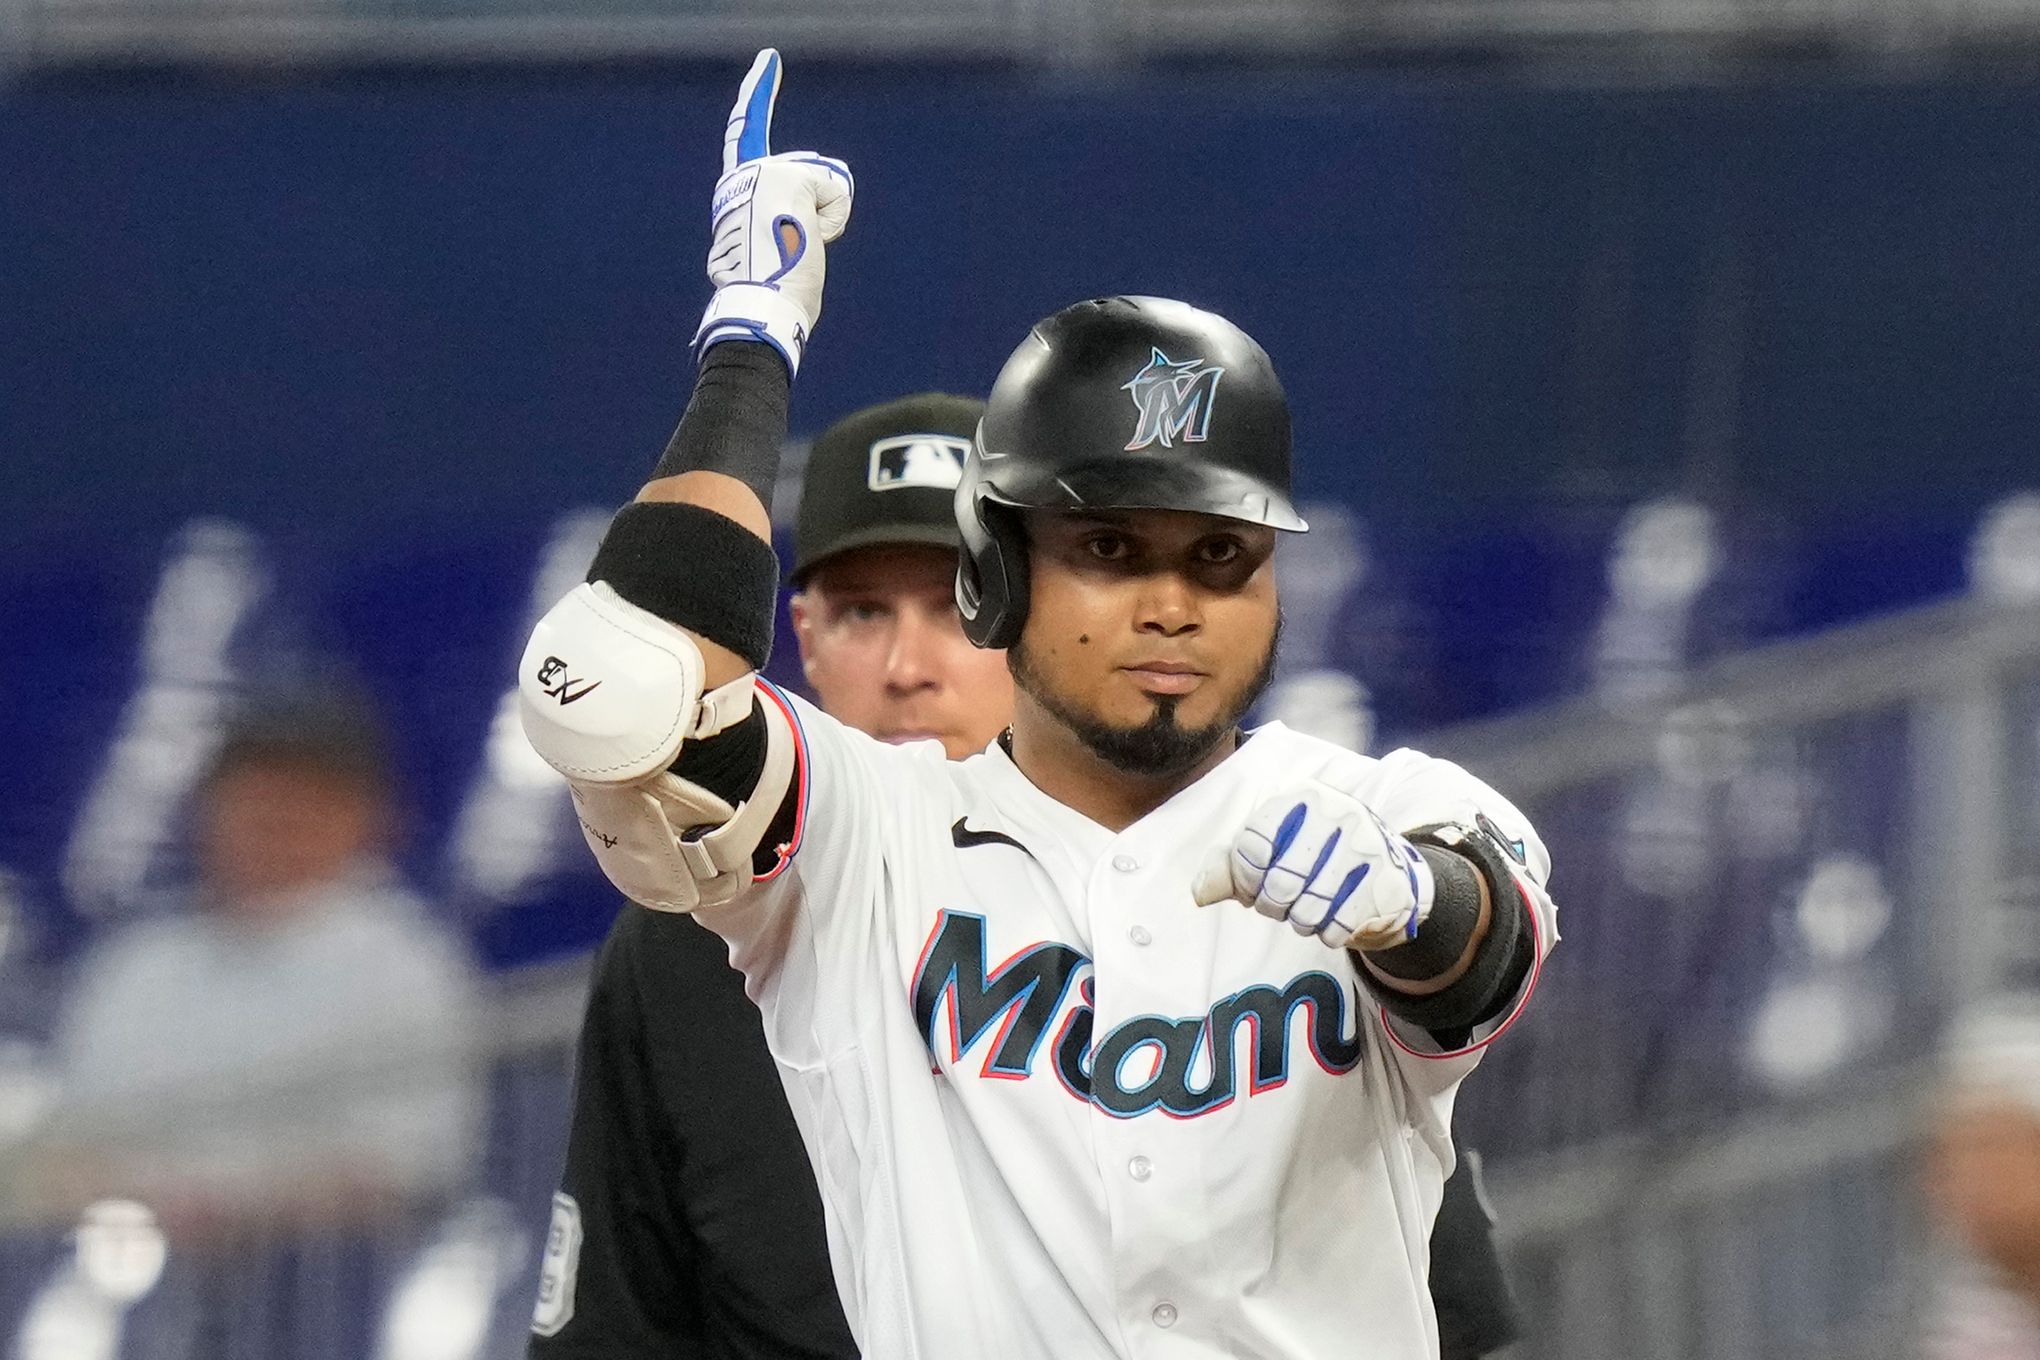 Luis Arraez is chasing .400 as the surging Marlins continue their